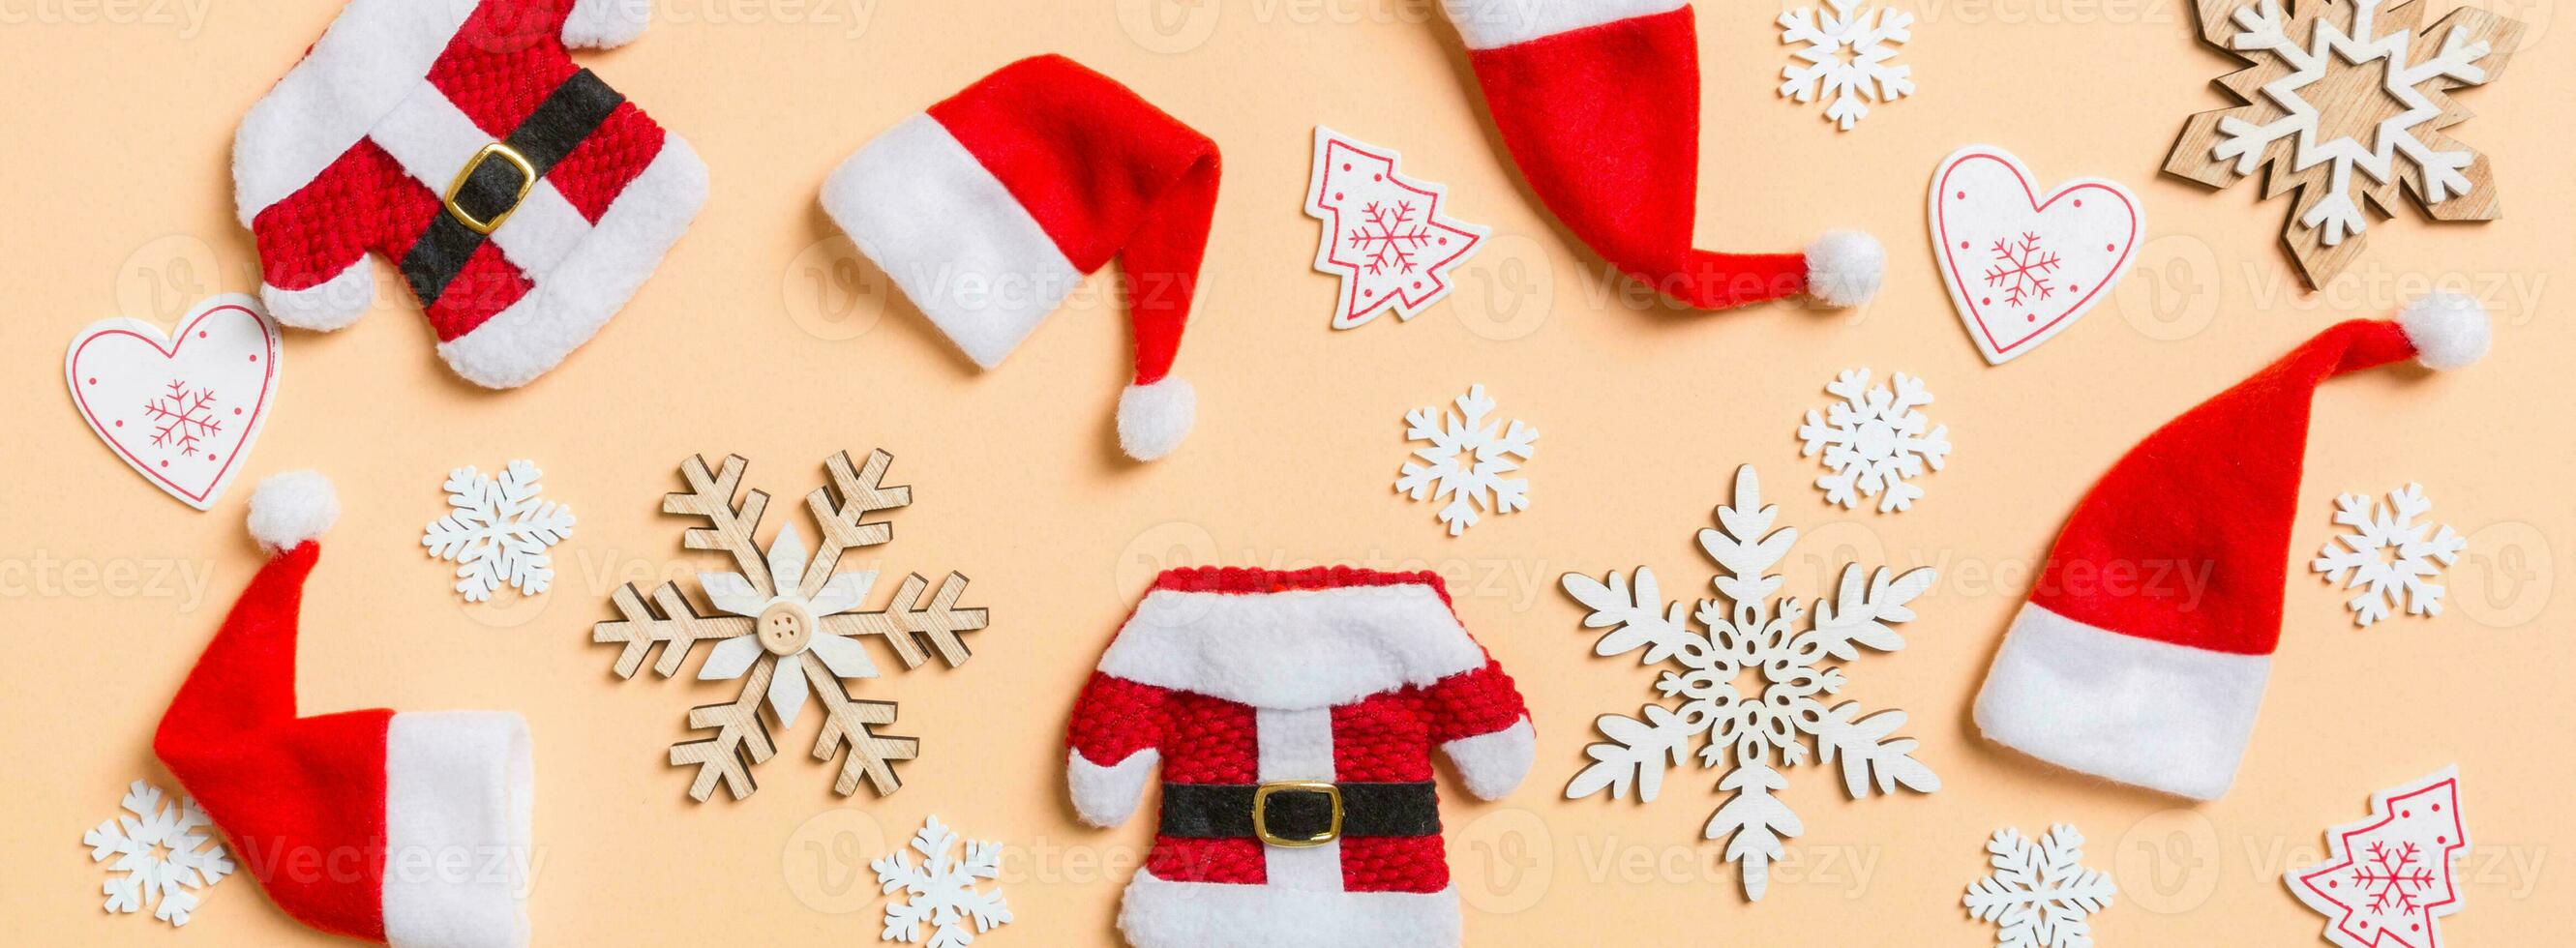 Top view Banner of Christmas decorations and Santa hats on orange background. Happy holiday concept photo